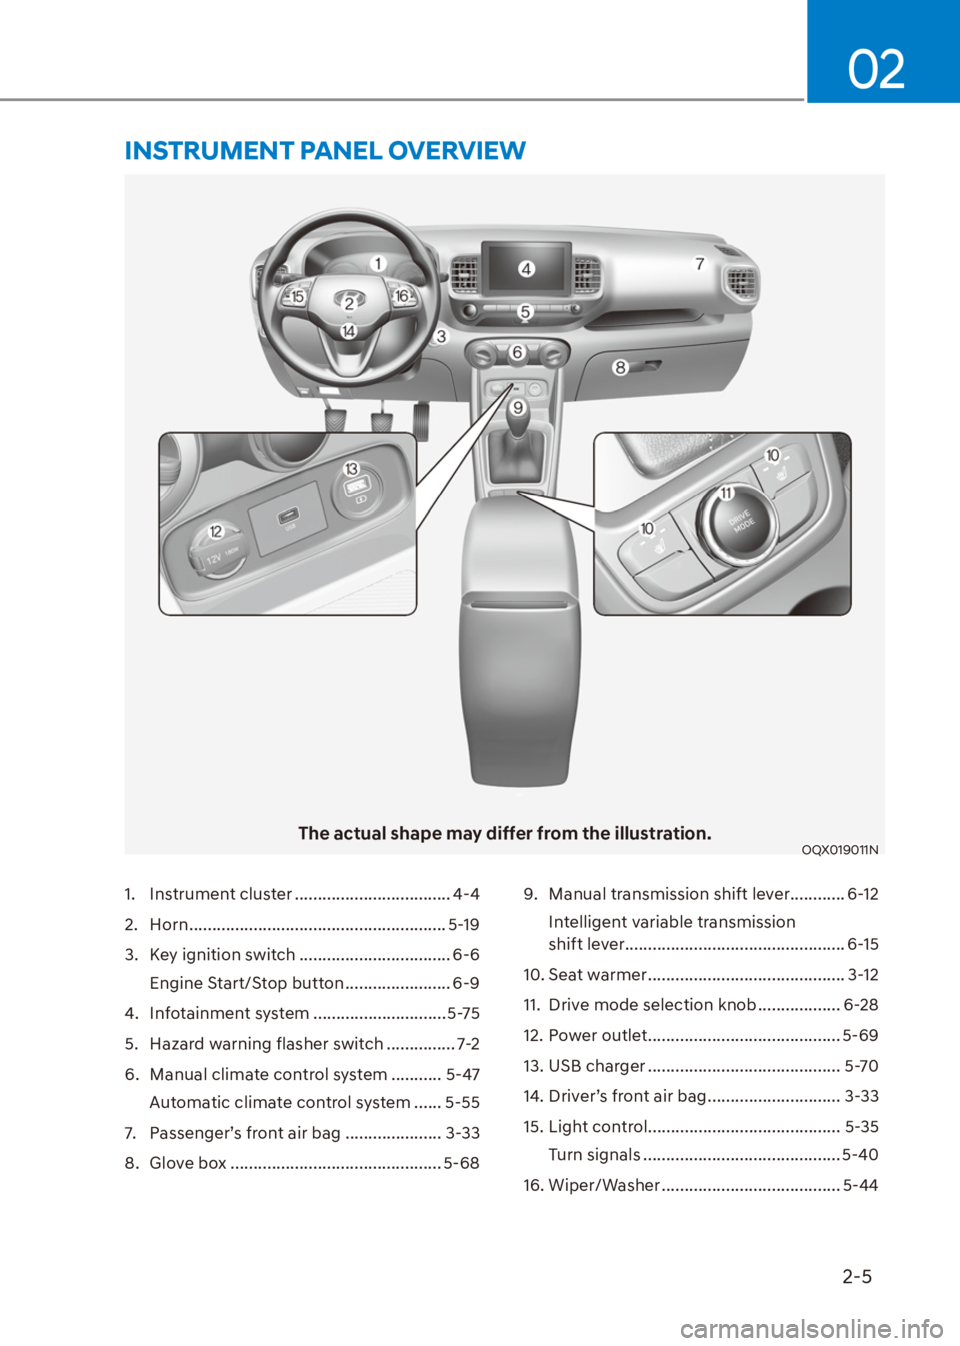 HYUNDAI VENUE 2021  Owners Manual 2-5
02
The actual shape may differ from the illustration.OQX019011N 
1. Instrument cluster .................................. 4-4
2. Horn ........................................................ 5-19
